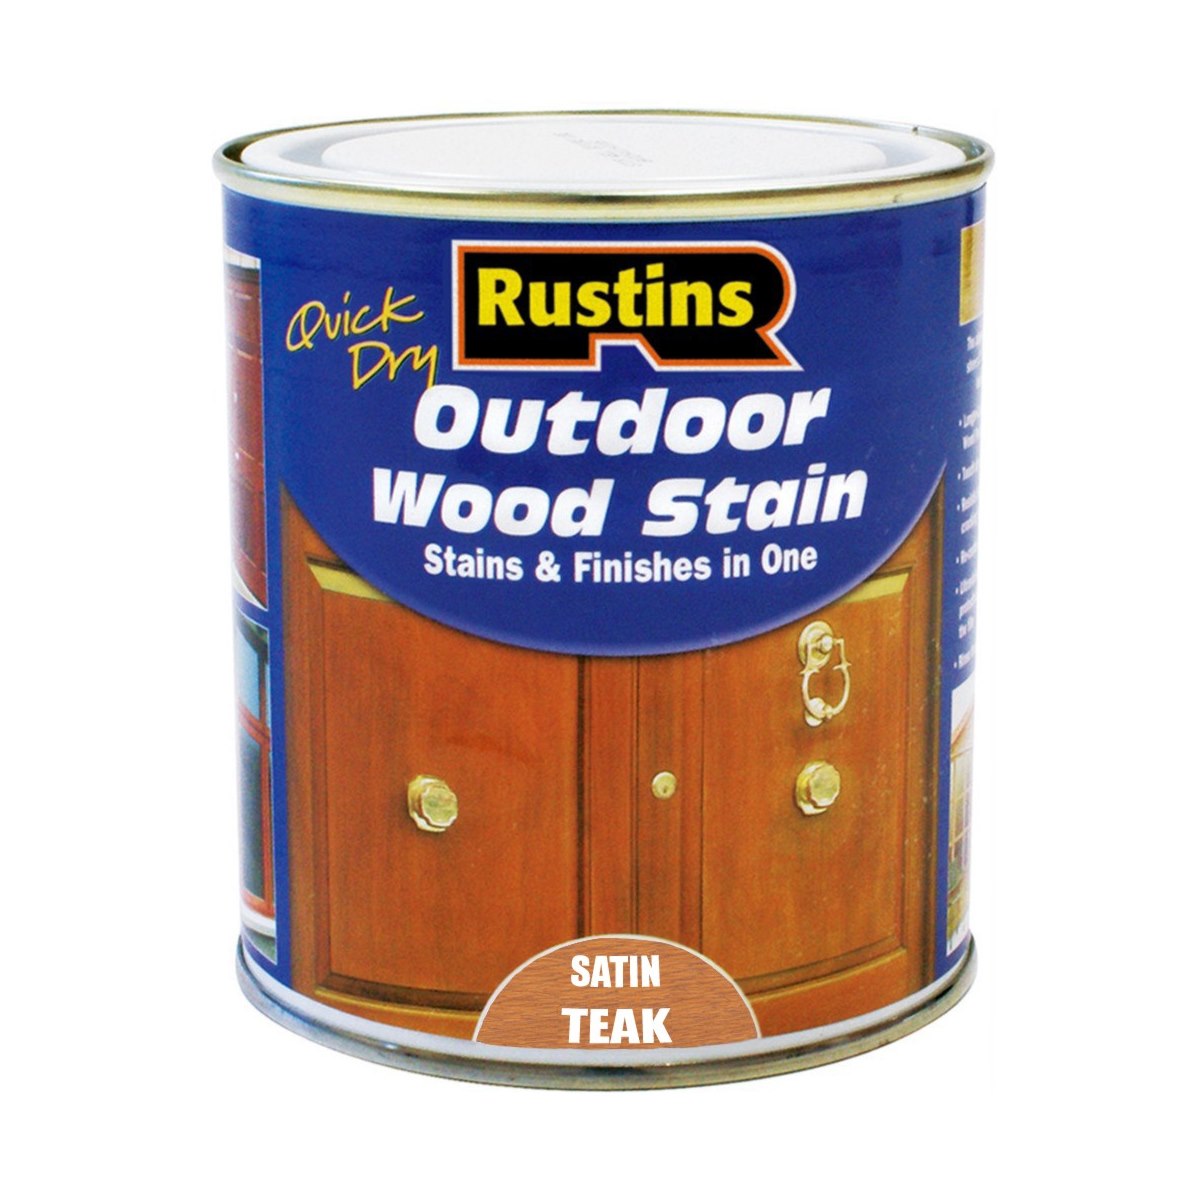 Rustins Quick Dry Outdoor Wood Stain Teak 2.5 Litre